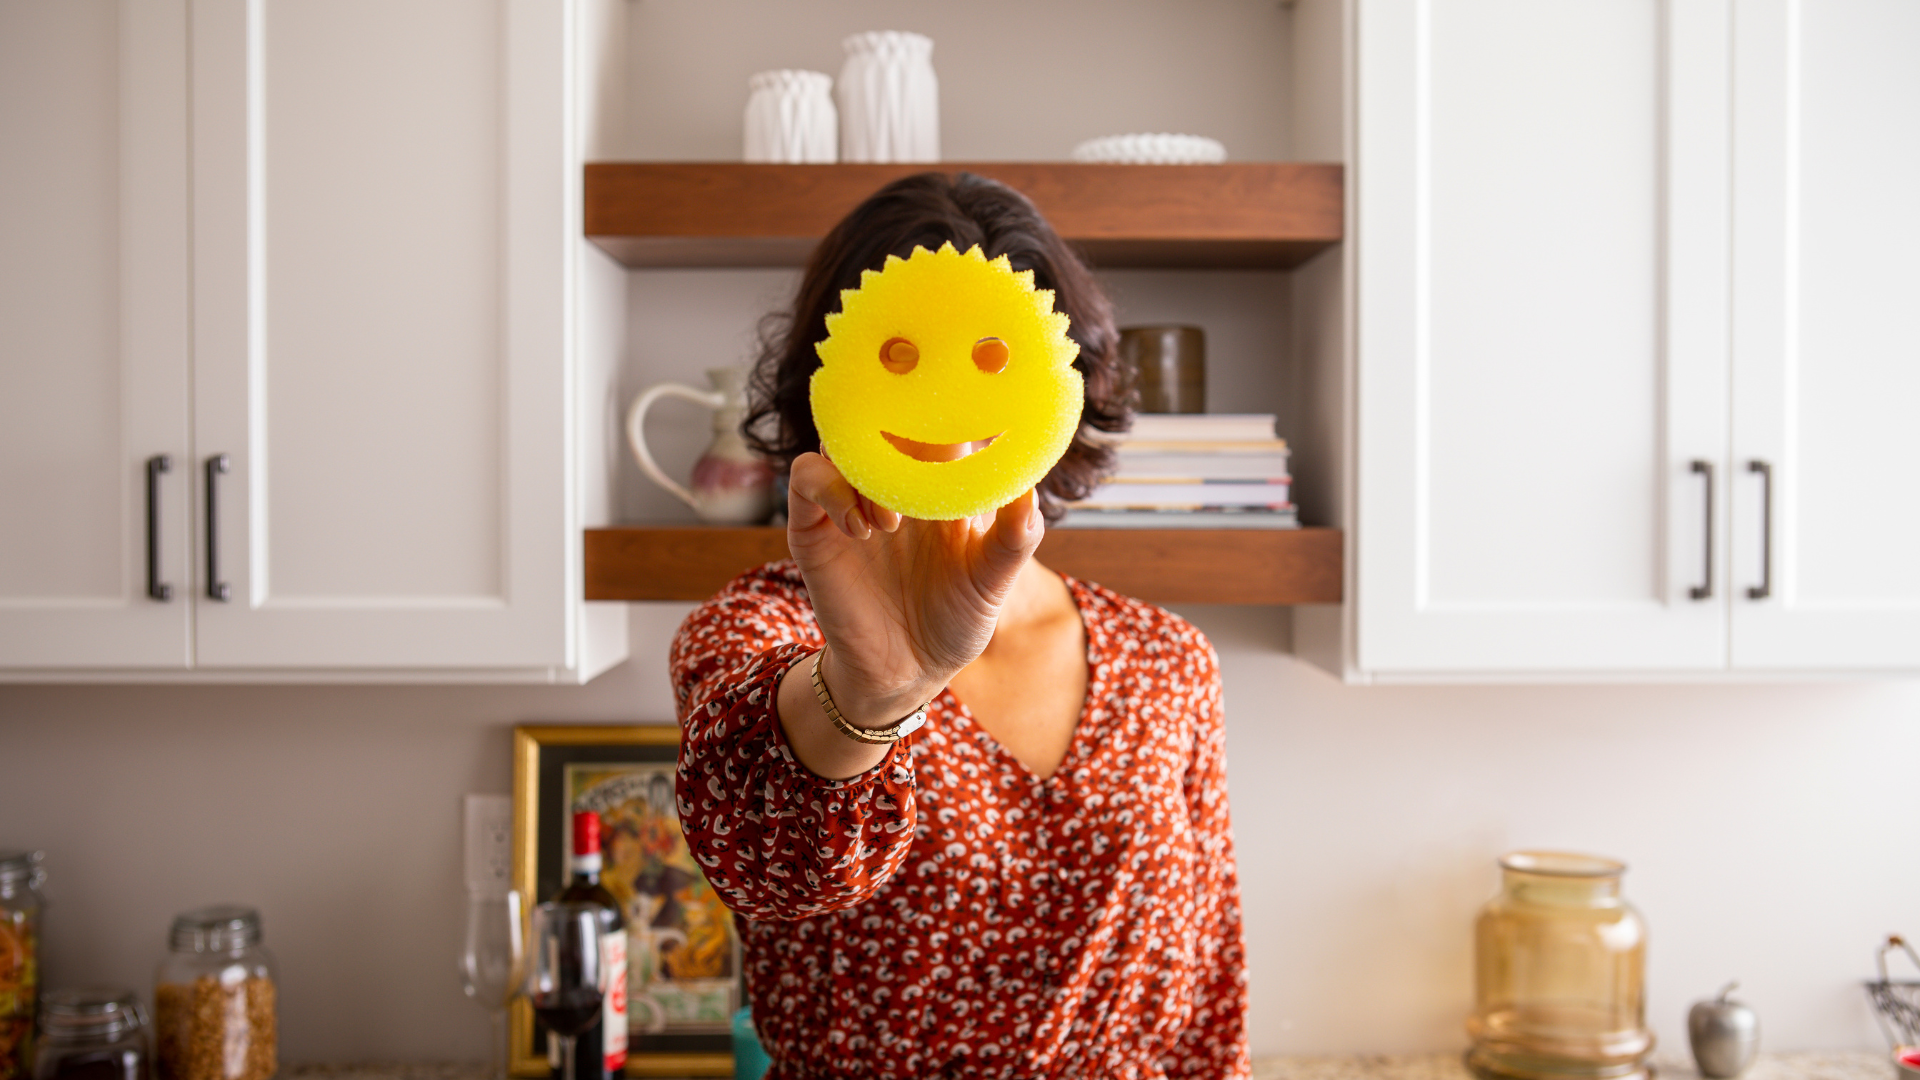 7 Unique Ways To Use Your Scrub Daddy